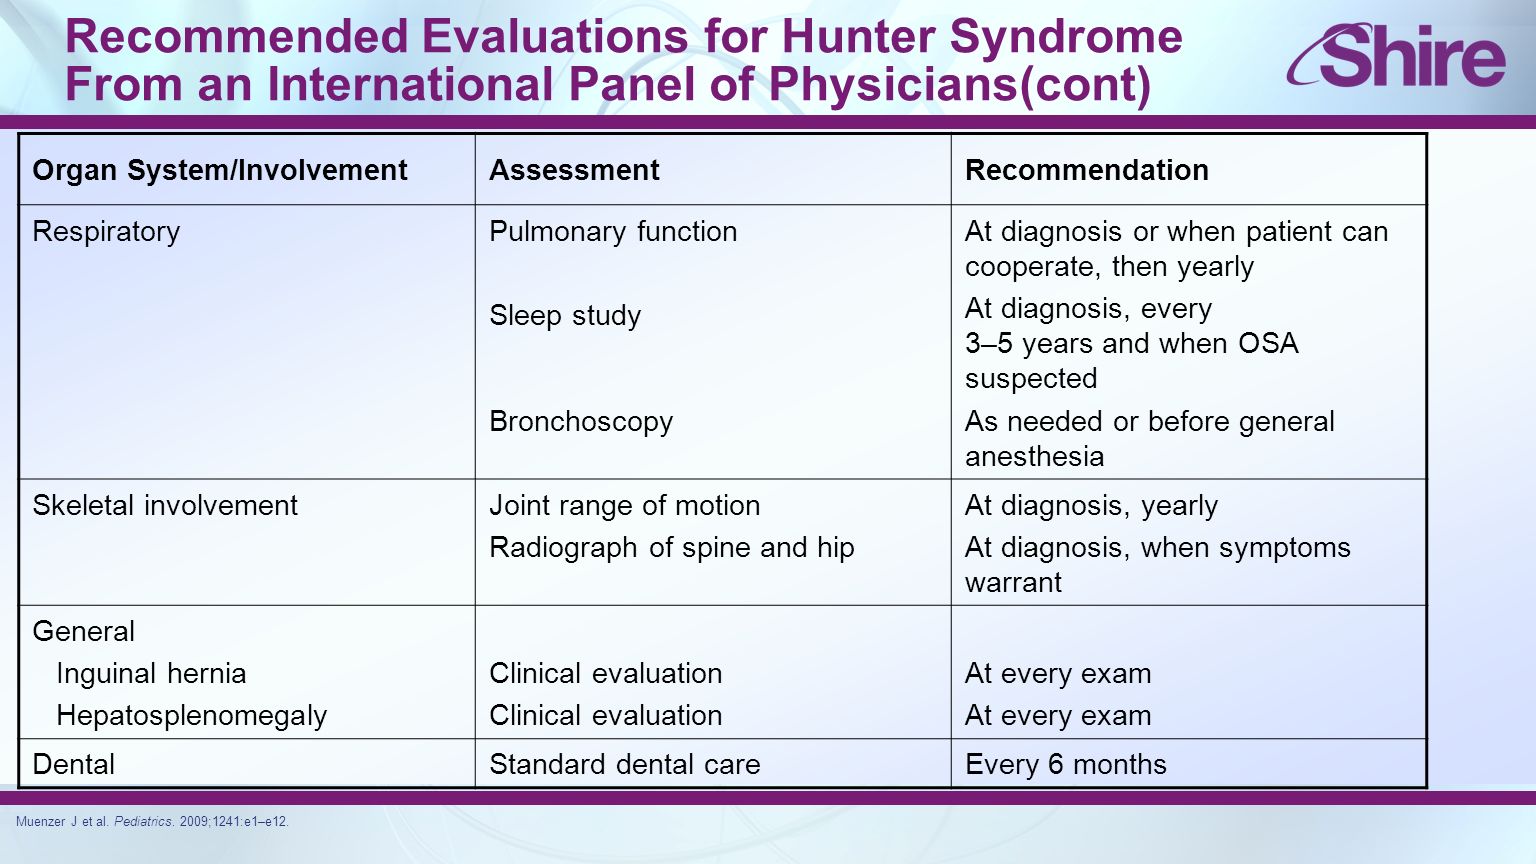 Recommended Evaluations for Hunter Syndrome From an International Panel of Physicians(cont) Organ System/InvolvementAssessmentRecommendation RespiratoryPulmonary function Sleep study Bronchoscopy At diagnosis or when patient can cooperate, then yearly At diagnosis, every 3–5 years and when OSA suspected As needed or before general anesthesia Skeletal involvementJoint range of motion Radiograph of spine and hip At diagnosis, yearly At diagnosis, when symptoms warrant General Inguinal hernia Hepatosplenomegaly Clinical evaluation At every exam DentalStandard dental careEvery 6 months Muenzer J et al.